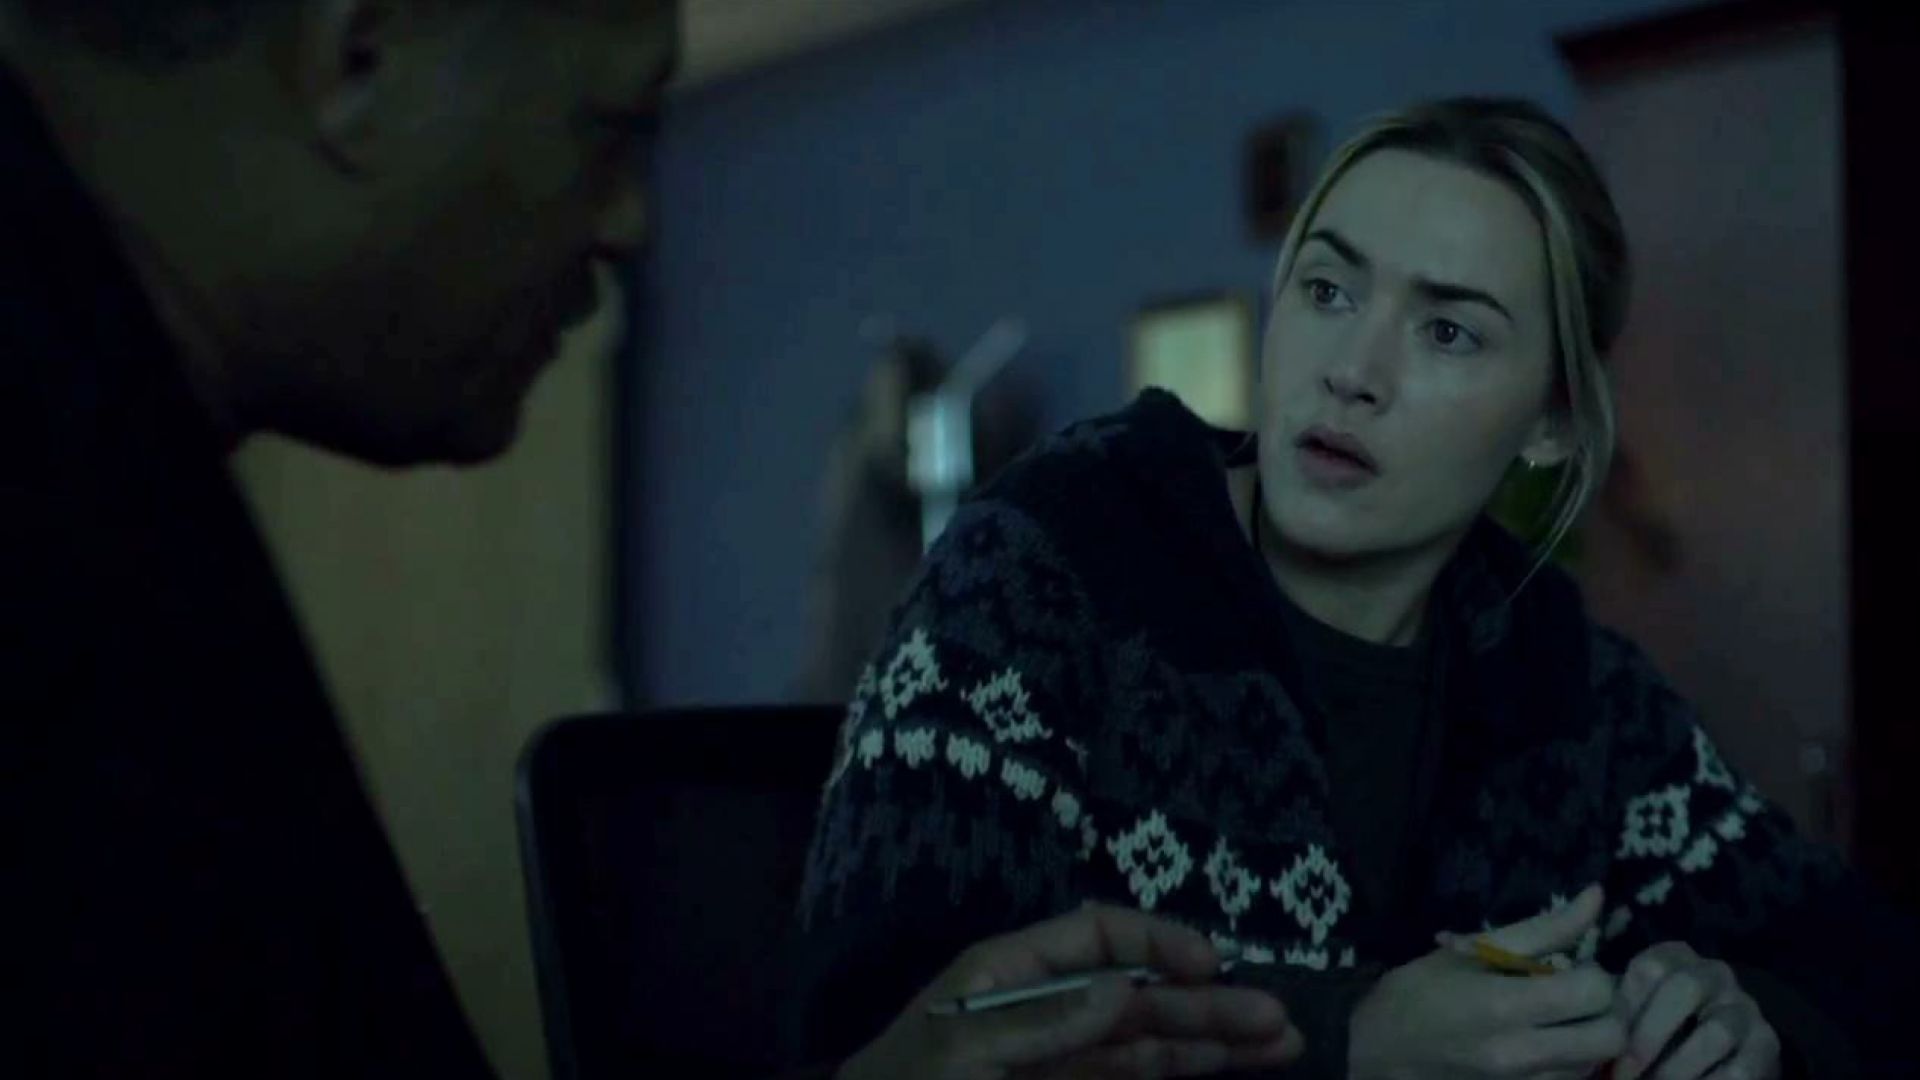 Laurence Fishburne and Kate Winslet discuss their strategy in Contagion